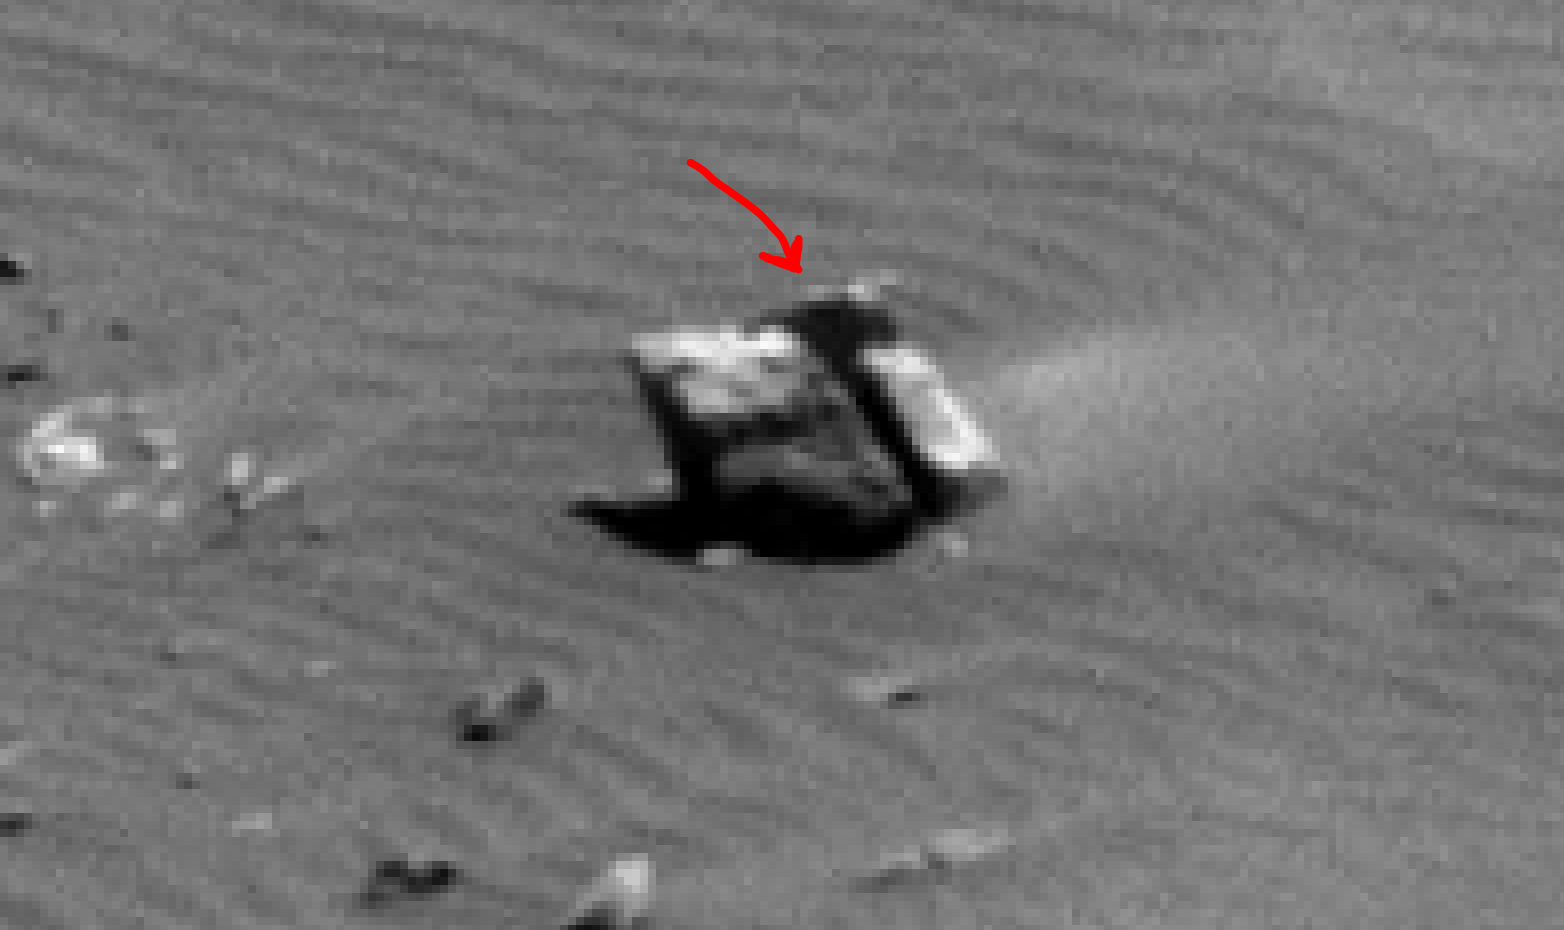 mars sol 1400 anomaly artifacts 2 was life on mars